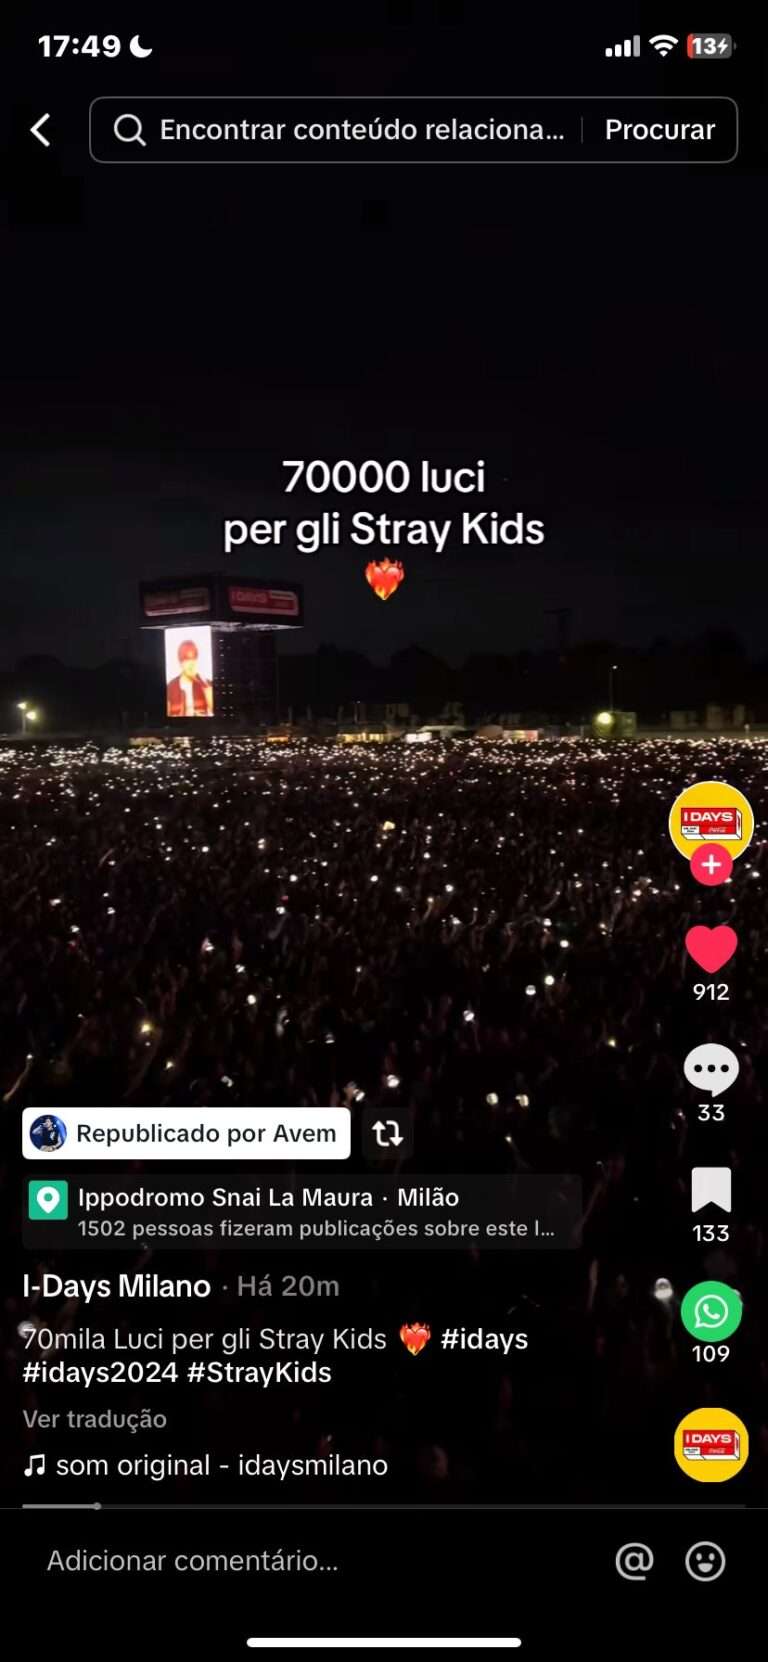 Stray Kids proves their popularity in Europe by attracting 70,000 spectators at festival in Italy